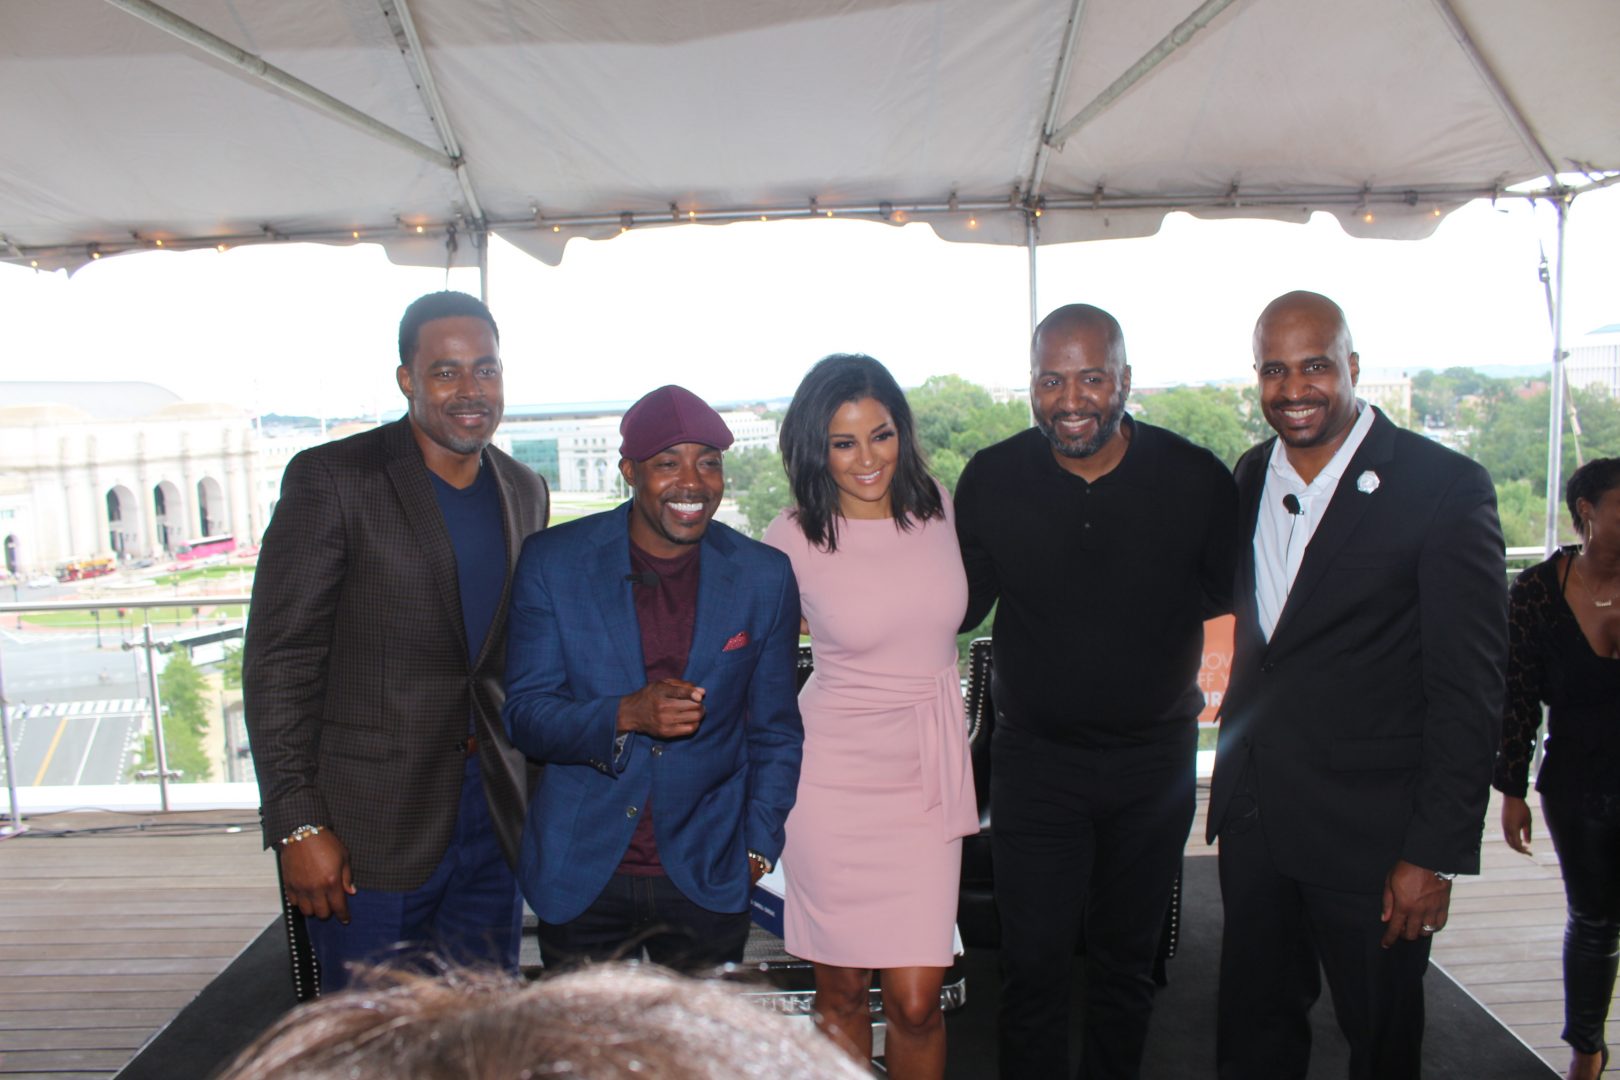 Filmmakers Will Packer and Malcolm Lee shared insider tips at influencer brunch